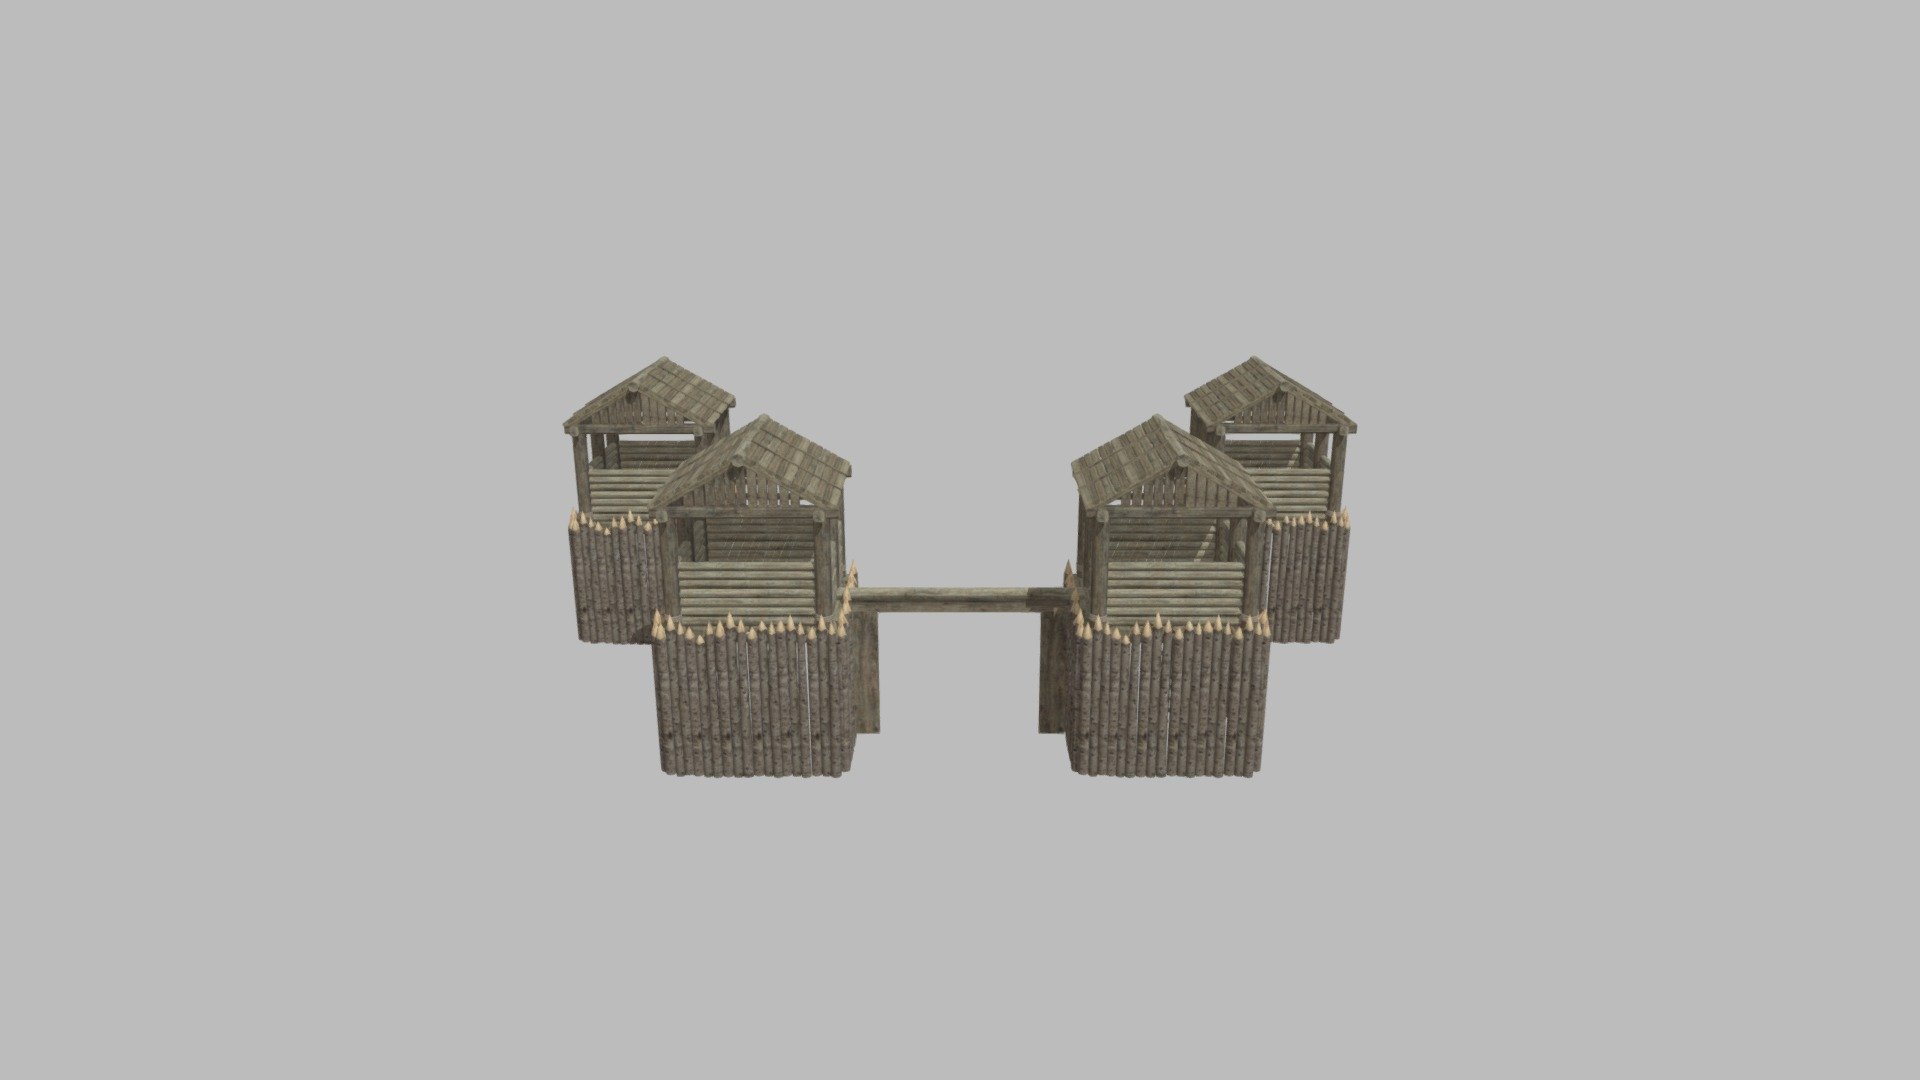 Palisade gate asset from my personal game project.

Palisade: https://sketchfab.com/3d-models/palisade-c88f57eb0d734484b010c3f170e48d4a - Palisade Gate - 3D model by Pechacek (@pechy.v) 3d model